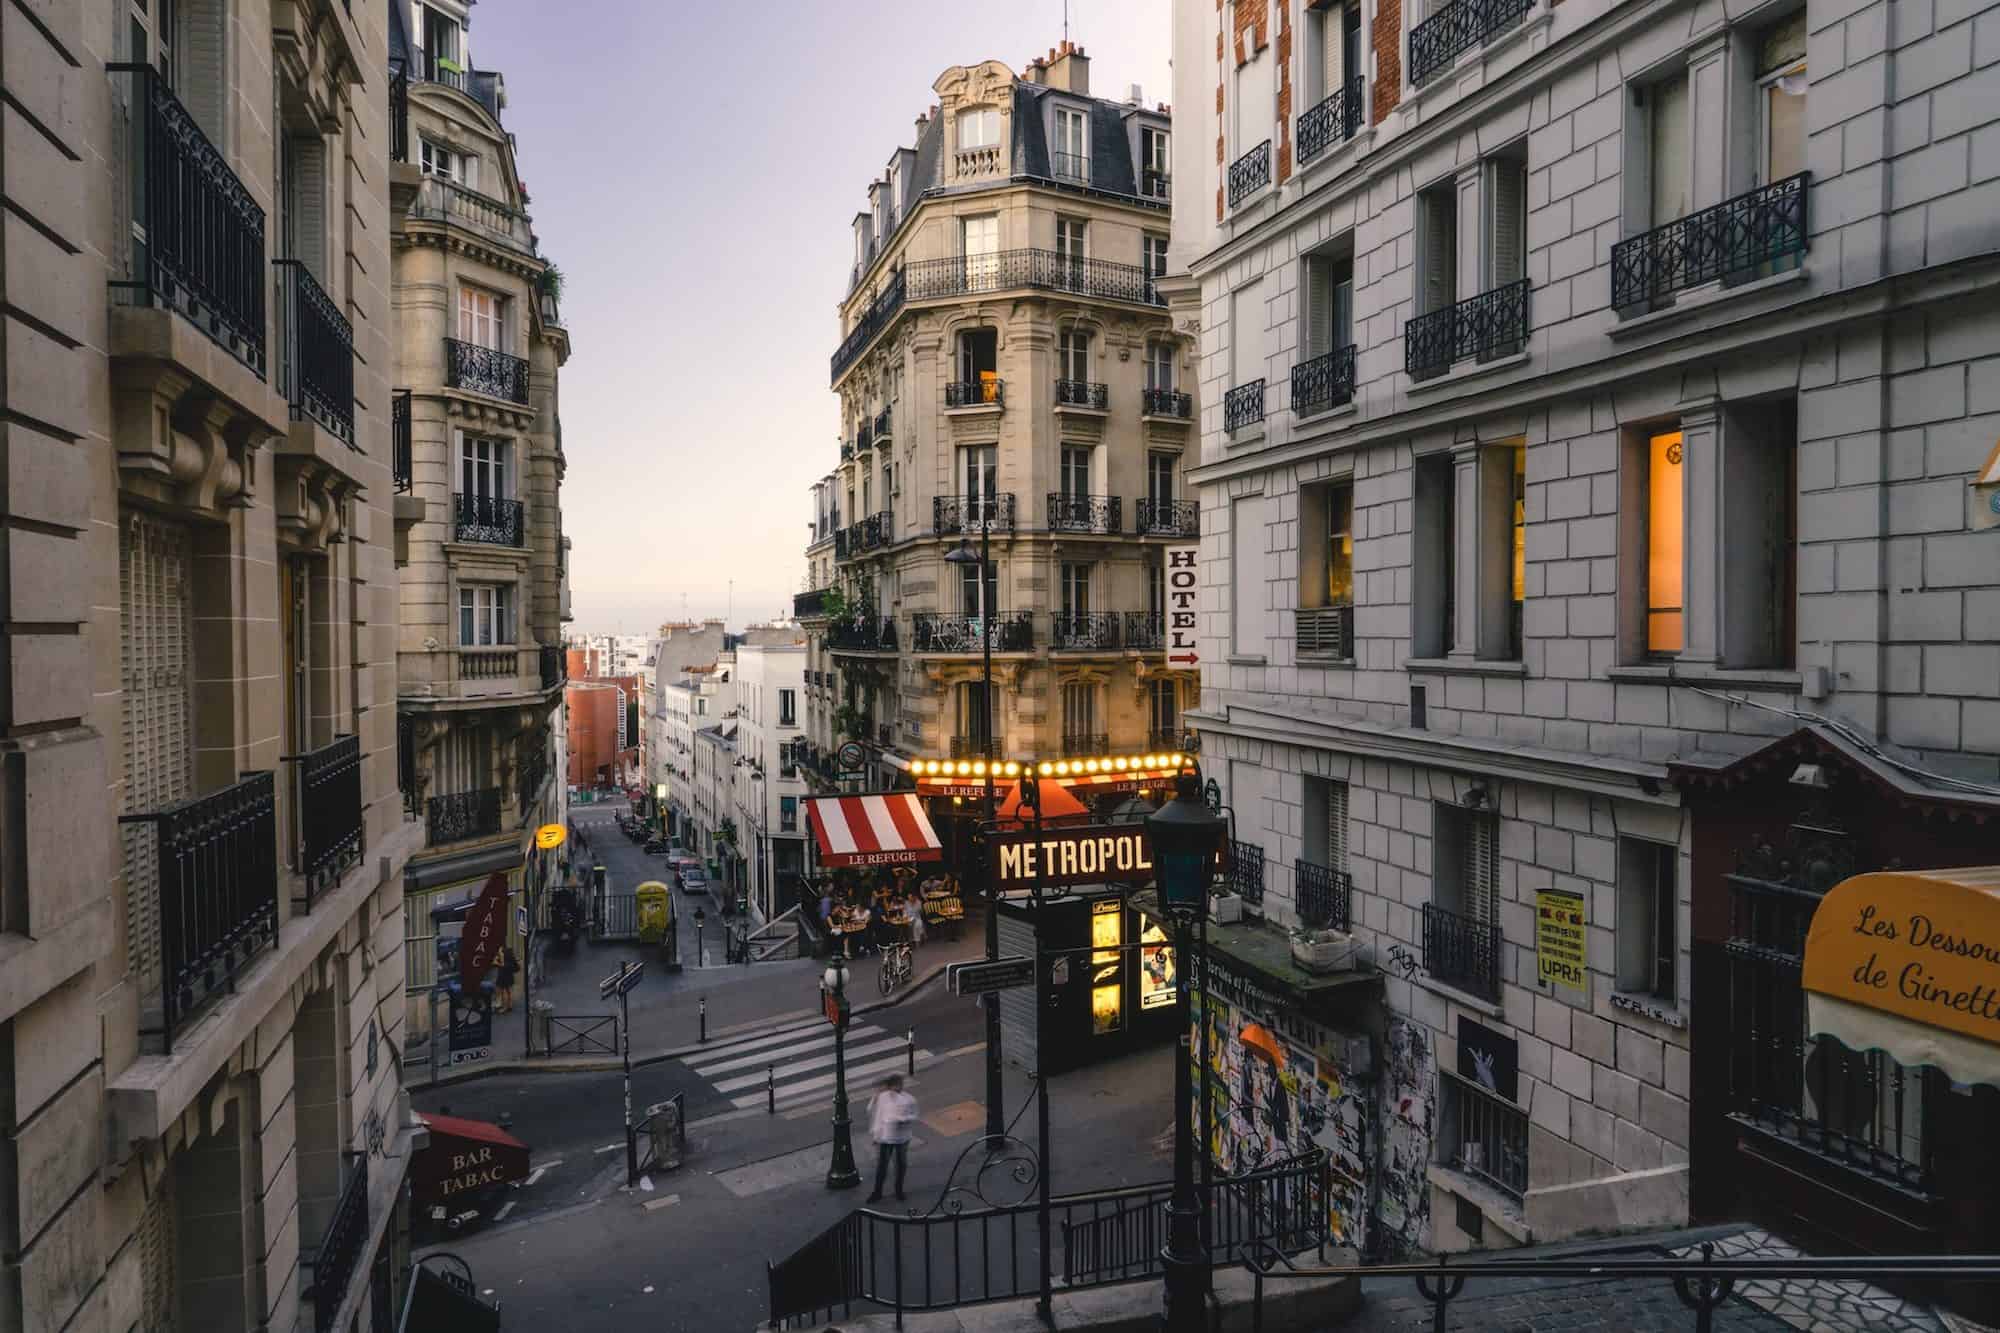 HiP Paris Blog tells the story of la rentrée before Parisians return from the summer holidays, which is when the city is at its quietest, including this Montmartre neighborhood.